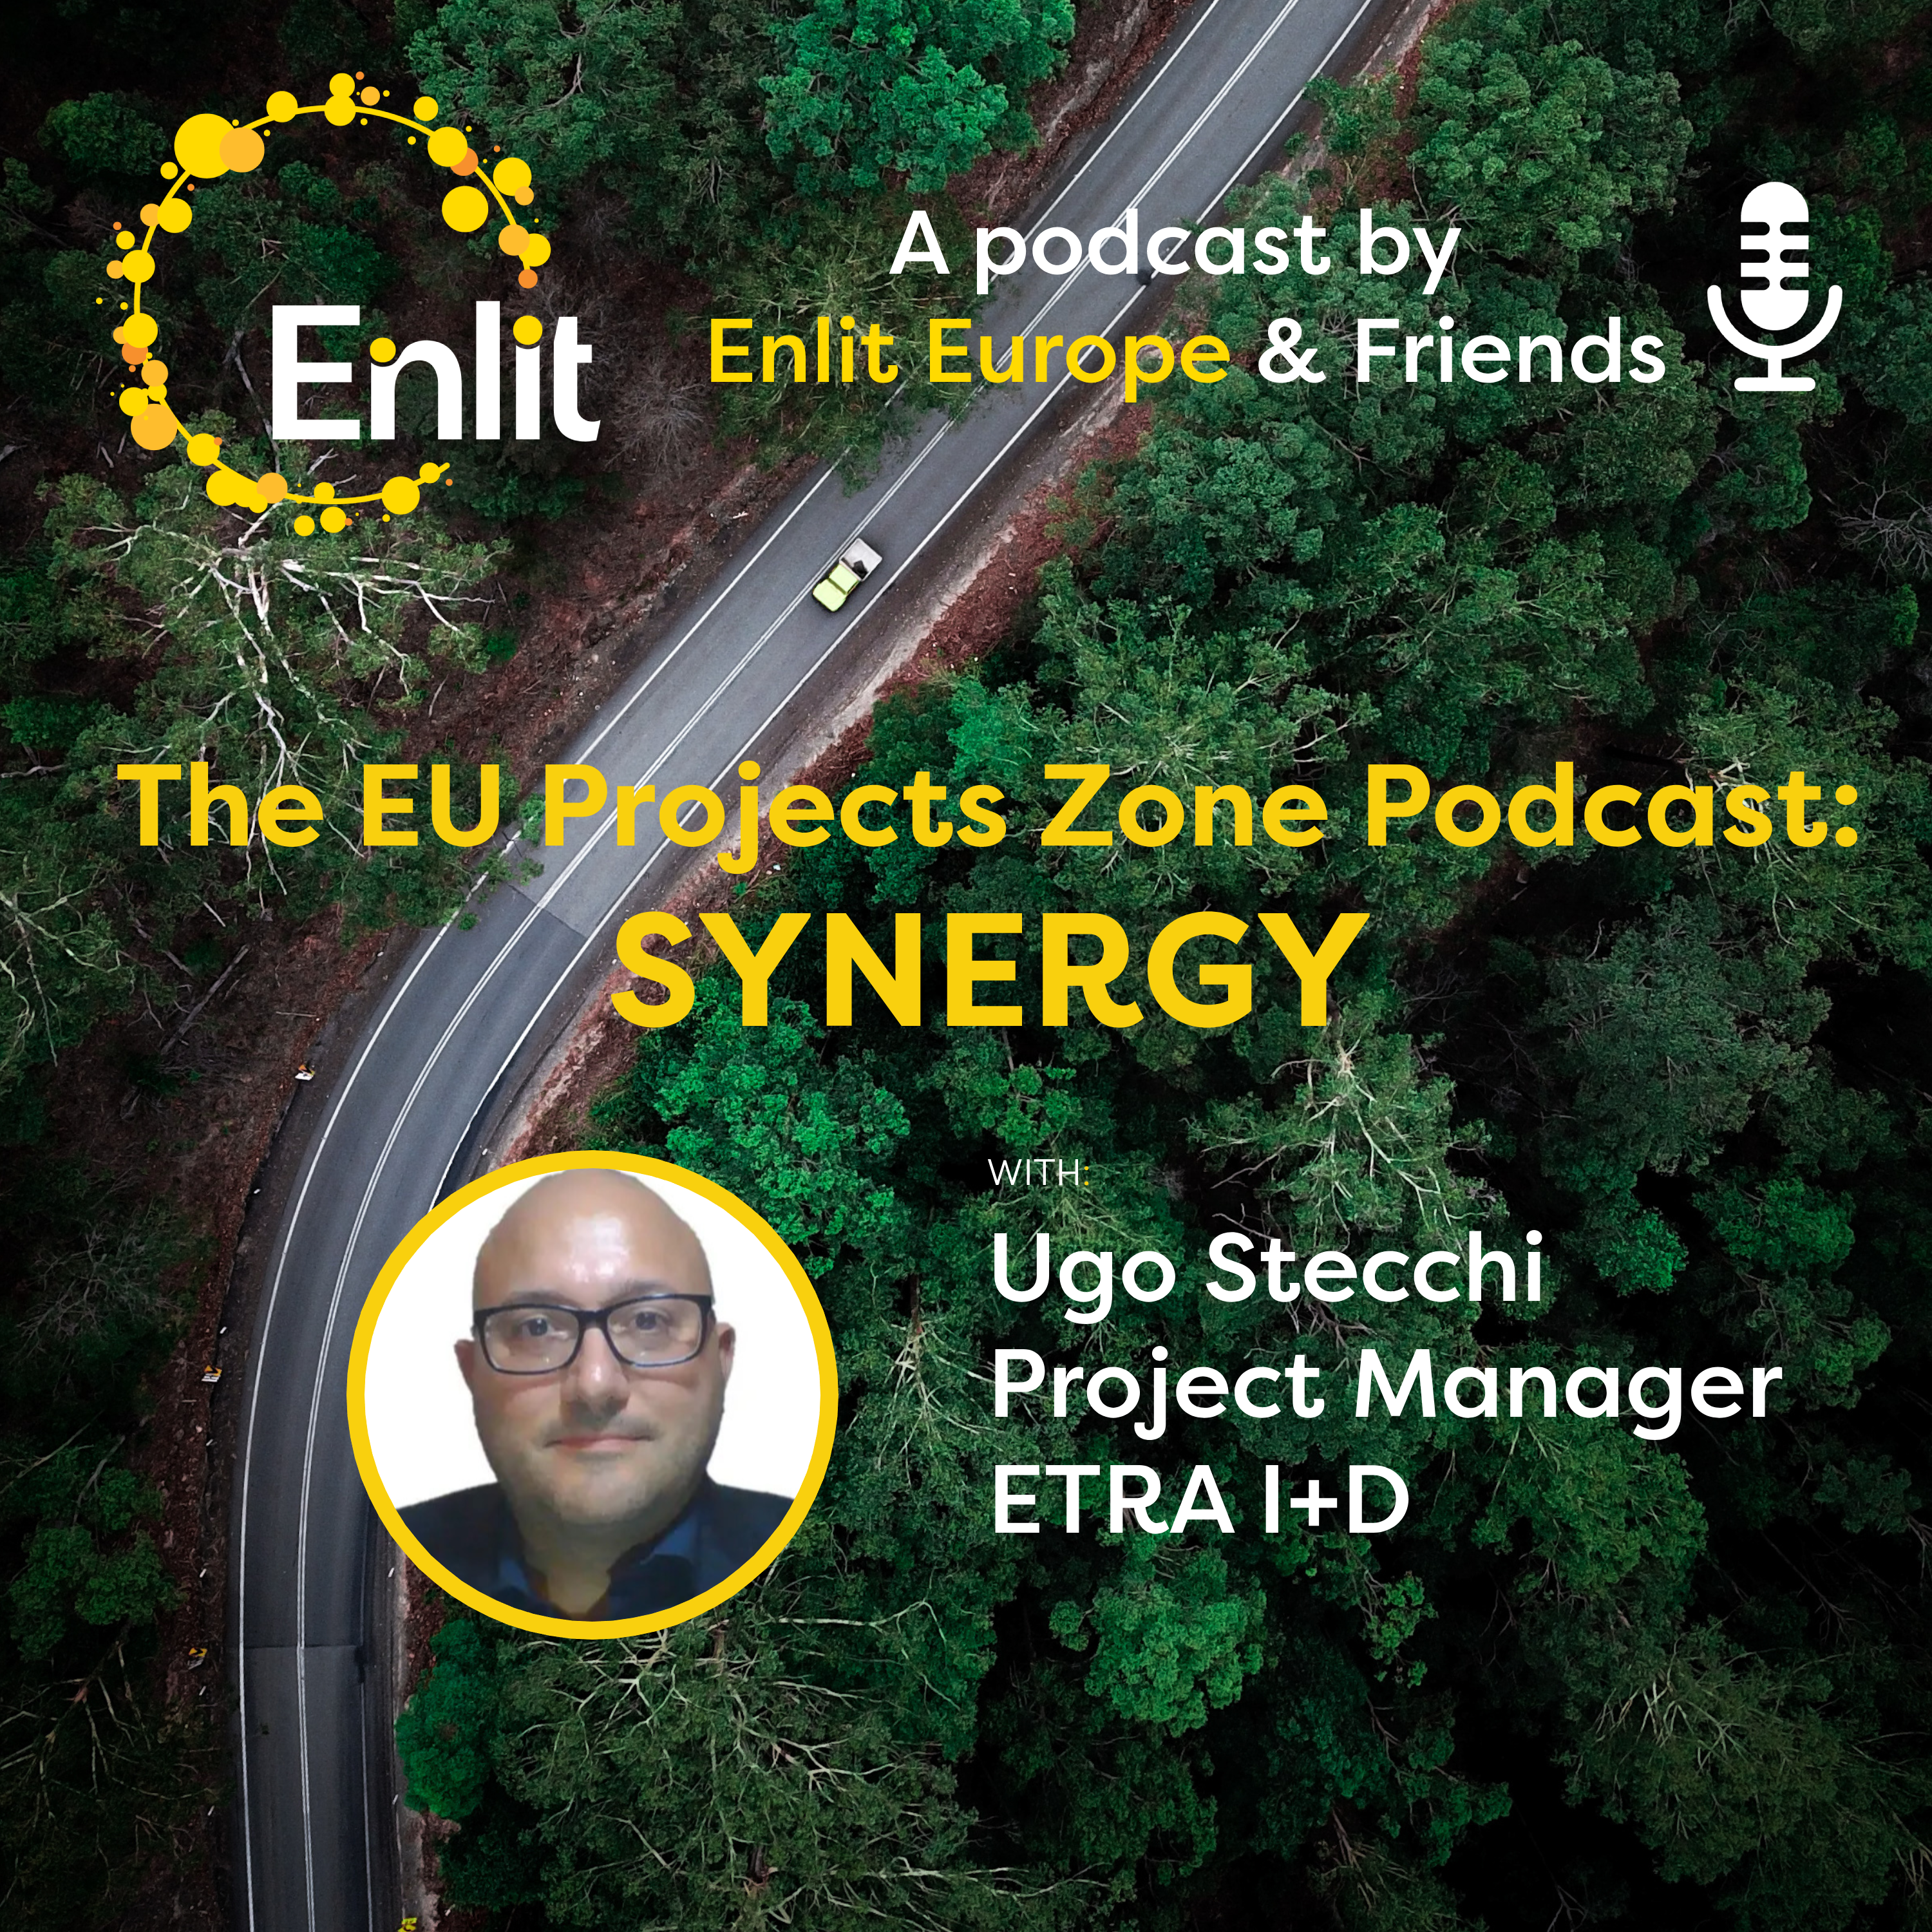 The EU Projects Zone Podcast: SYNERGY with Ugo Stecchi